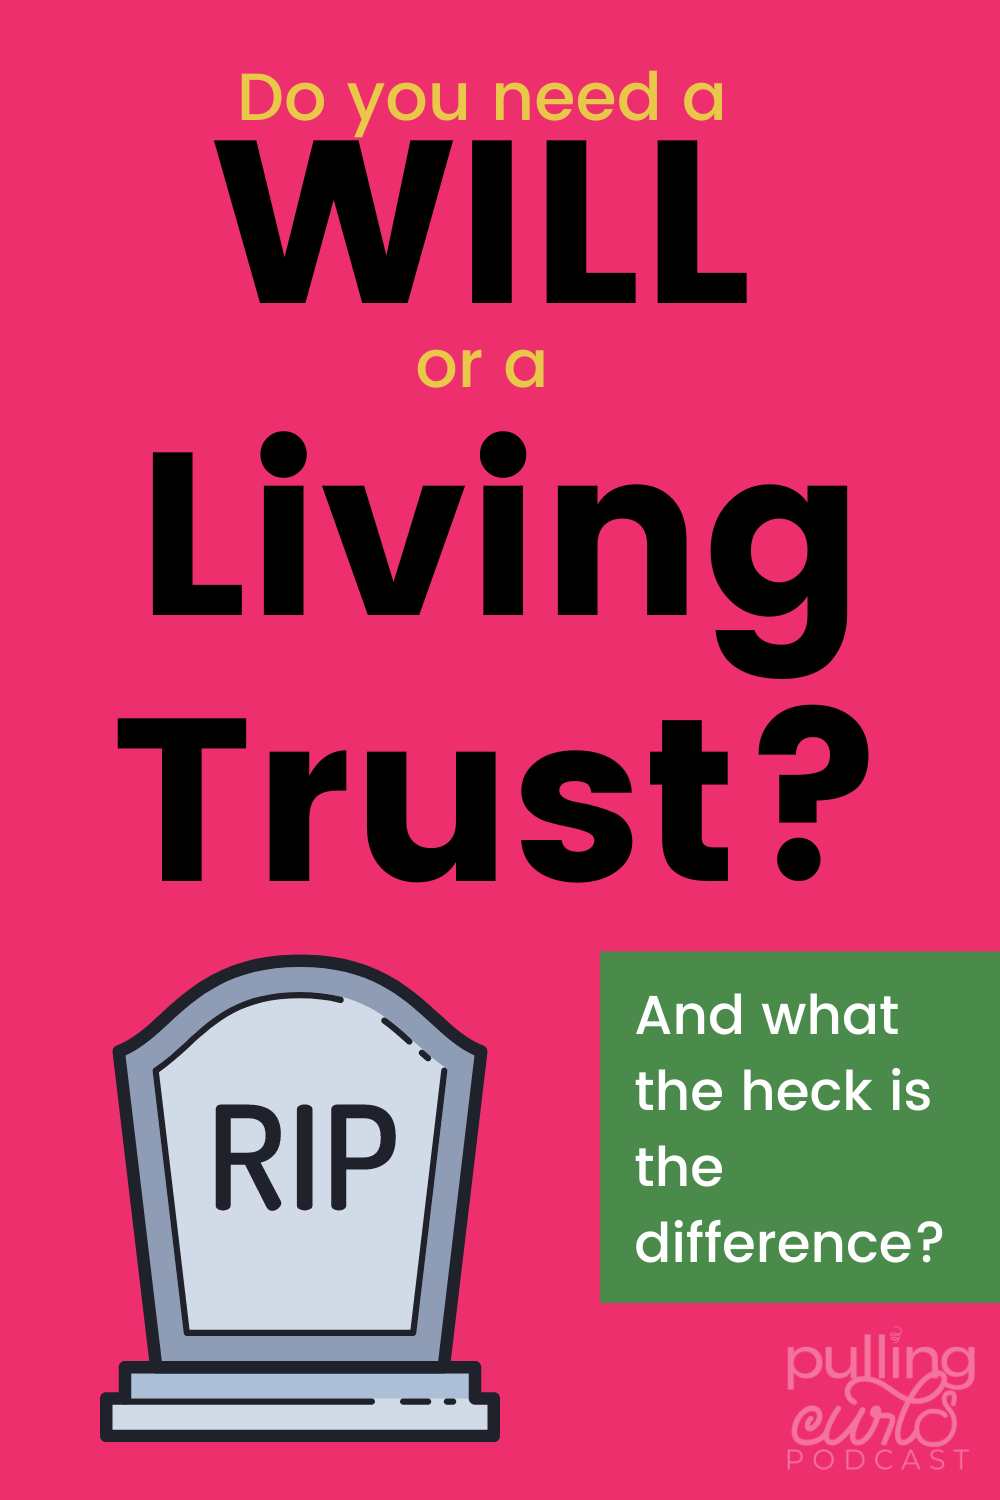 Don't know where to start when it comes to creating a will or trust? Have no fear! This walks you through the basics, even if you don't have any money for a lawyer. via @pullingcurls